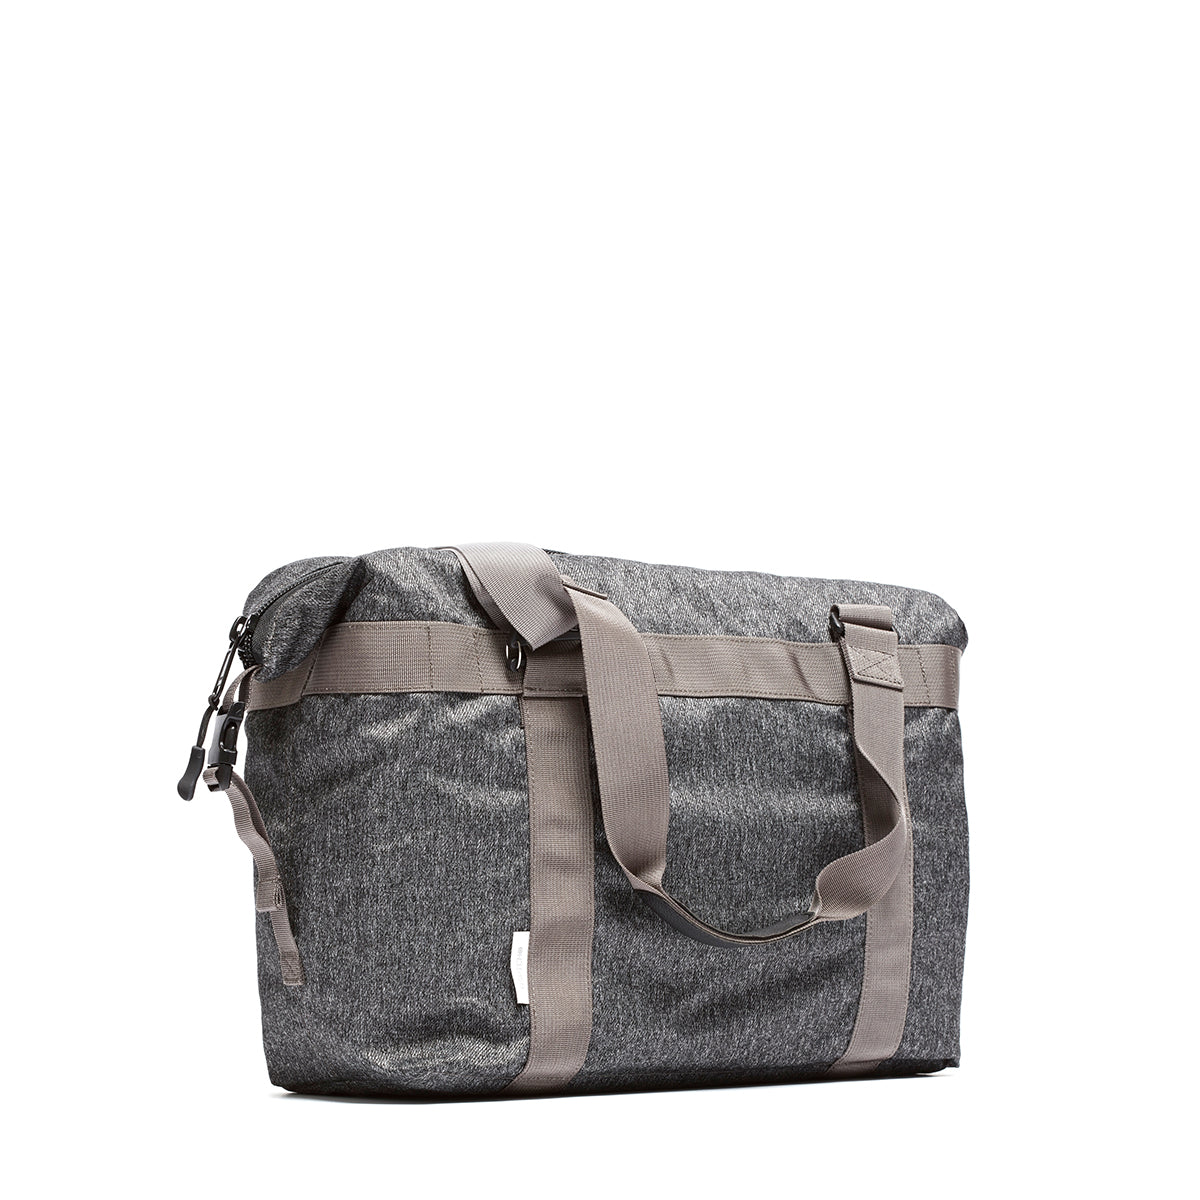 DSPTCH UTILITY TOTE SPECKLED TWILL